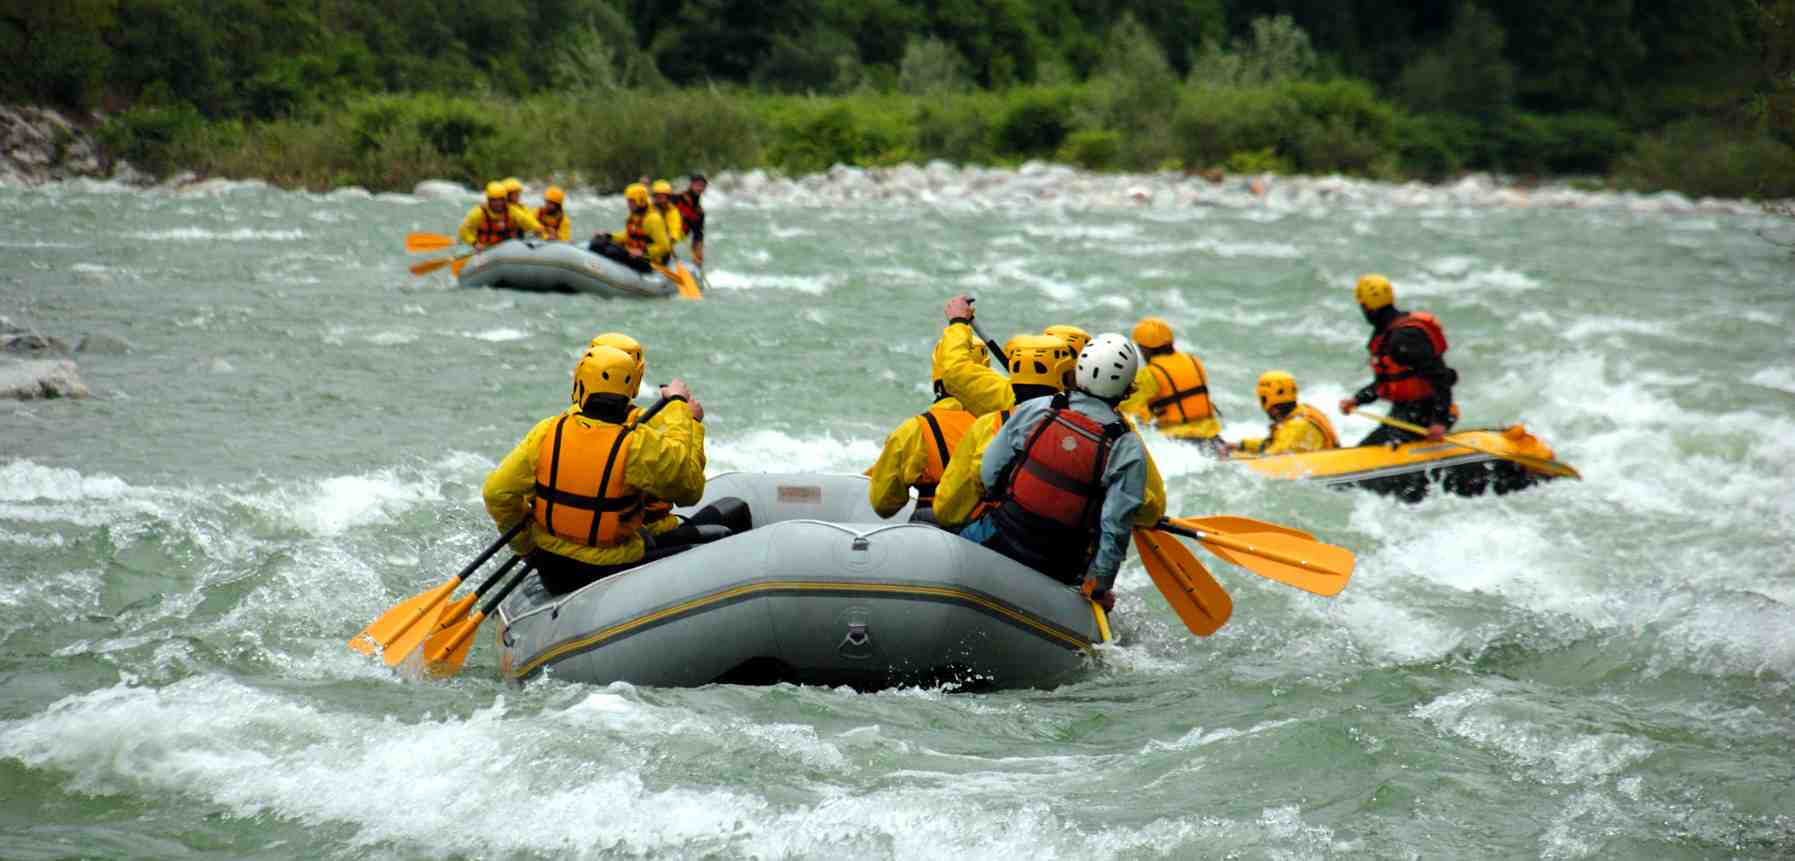 Go for a river rafting adventure